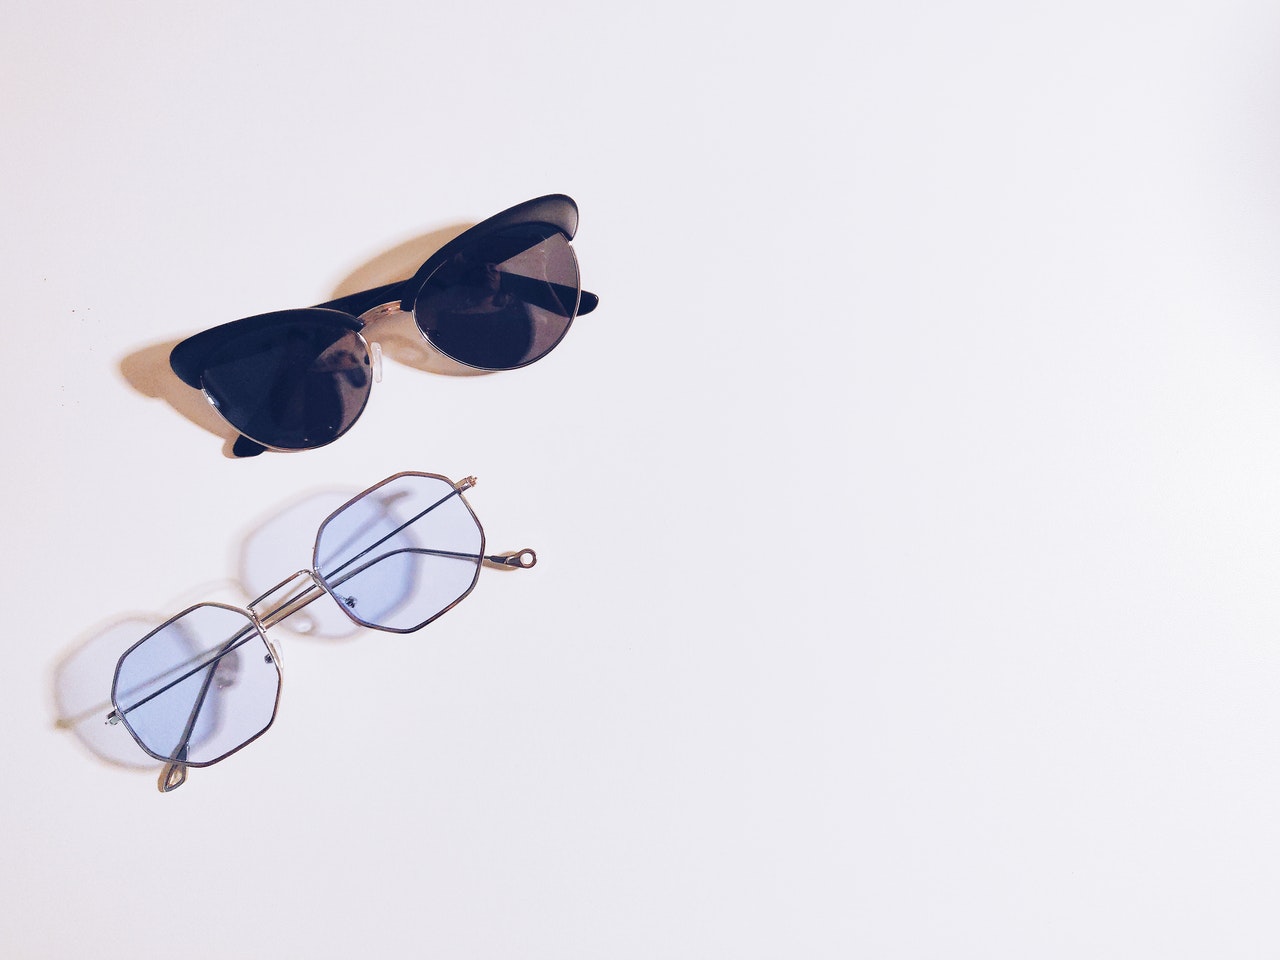 Eyewear trends to keep an eye out for in 2021